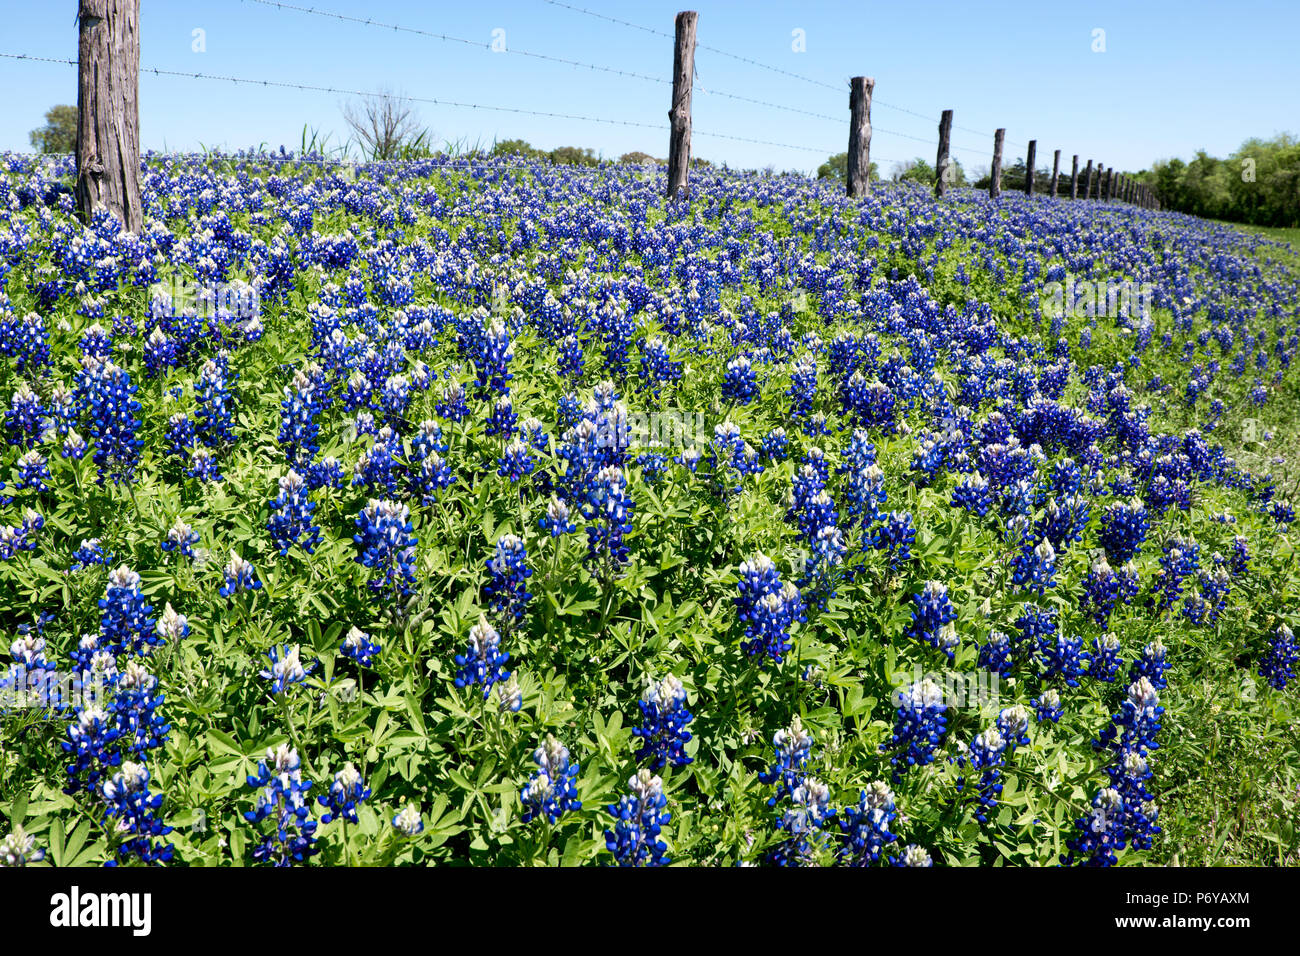 A barbed wire fence bisects a field full of Texas bluebonnets and a blue sky background. Stock Photo